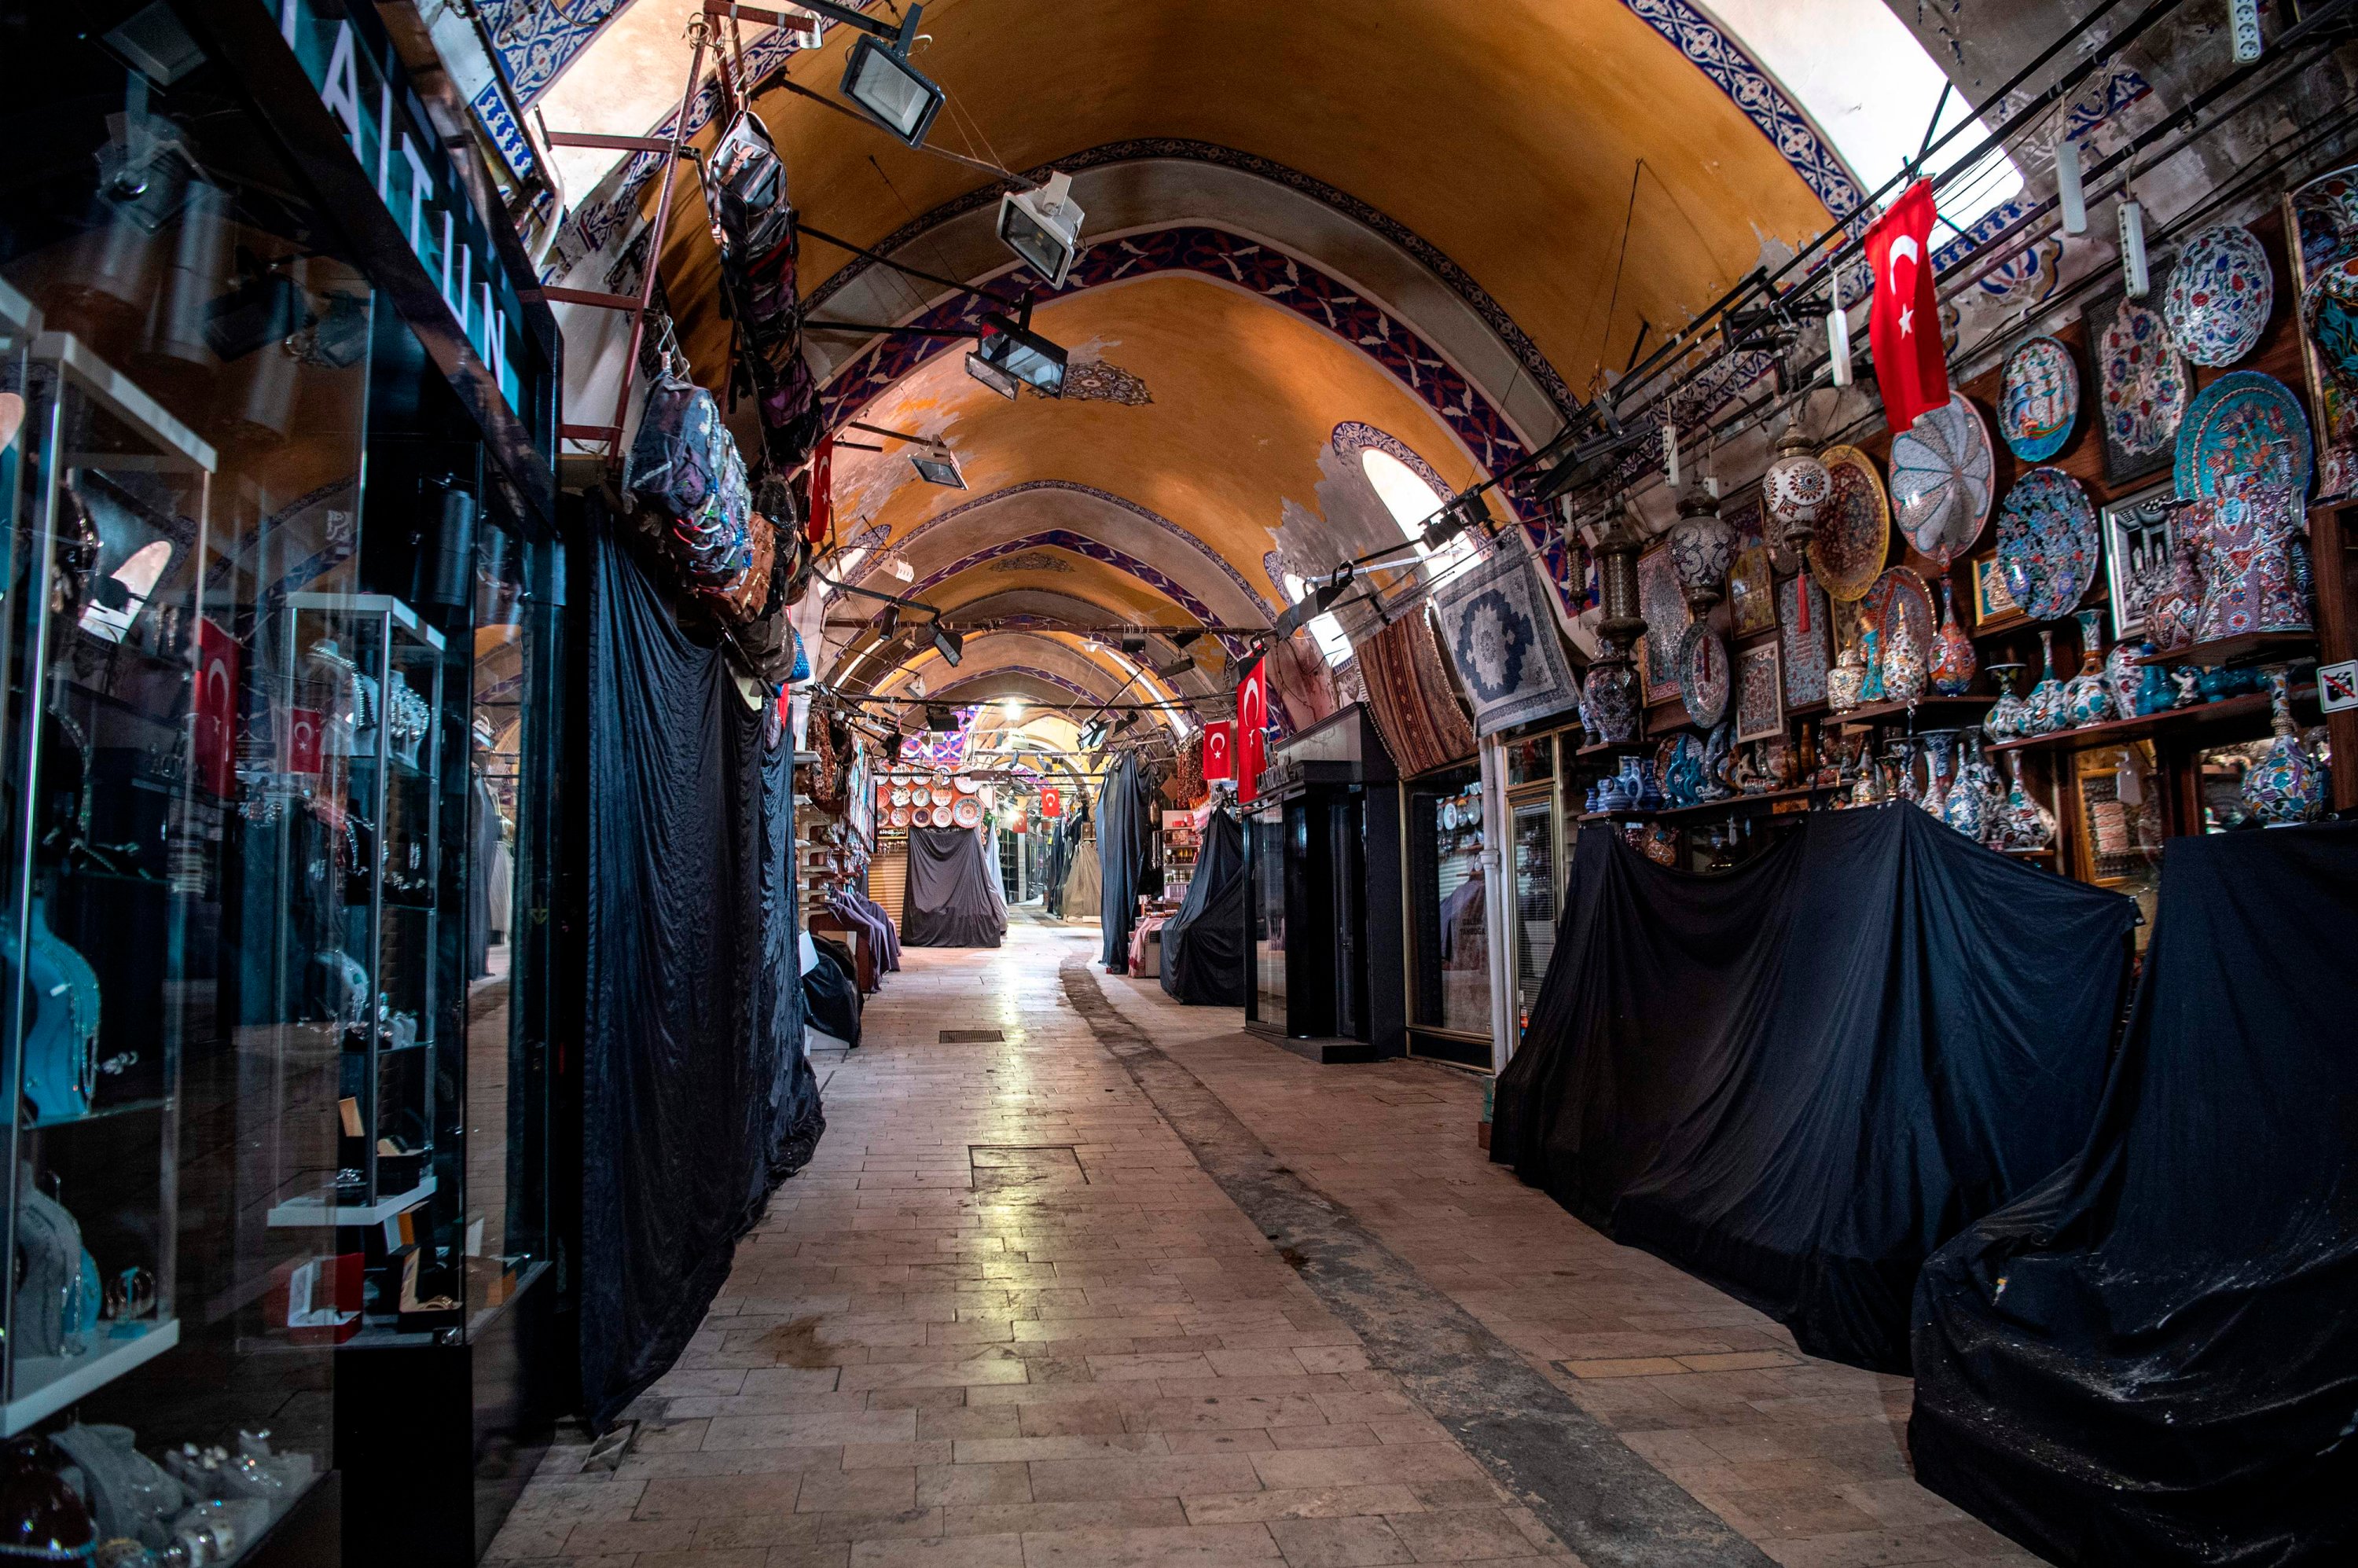 Istanbul's spectacular, historical grand bazaars and markets